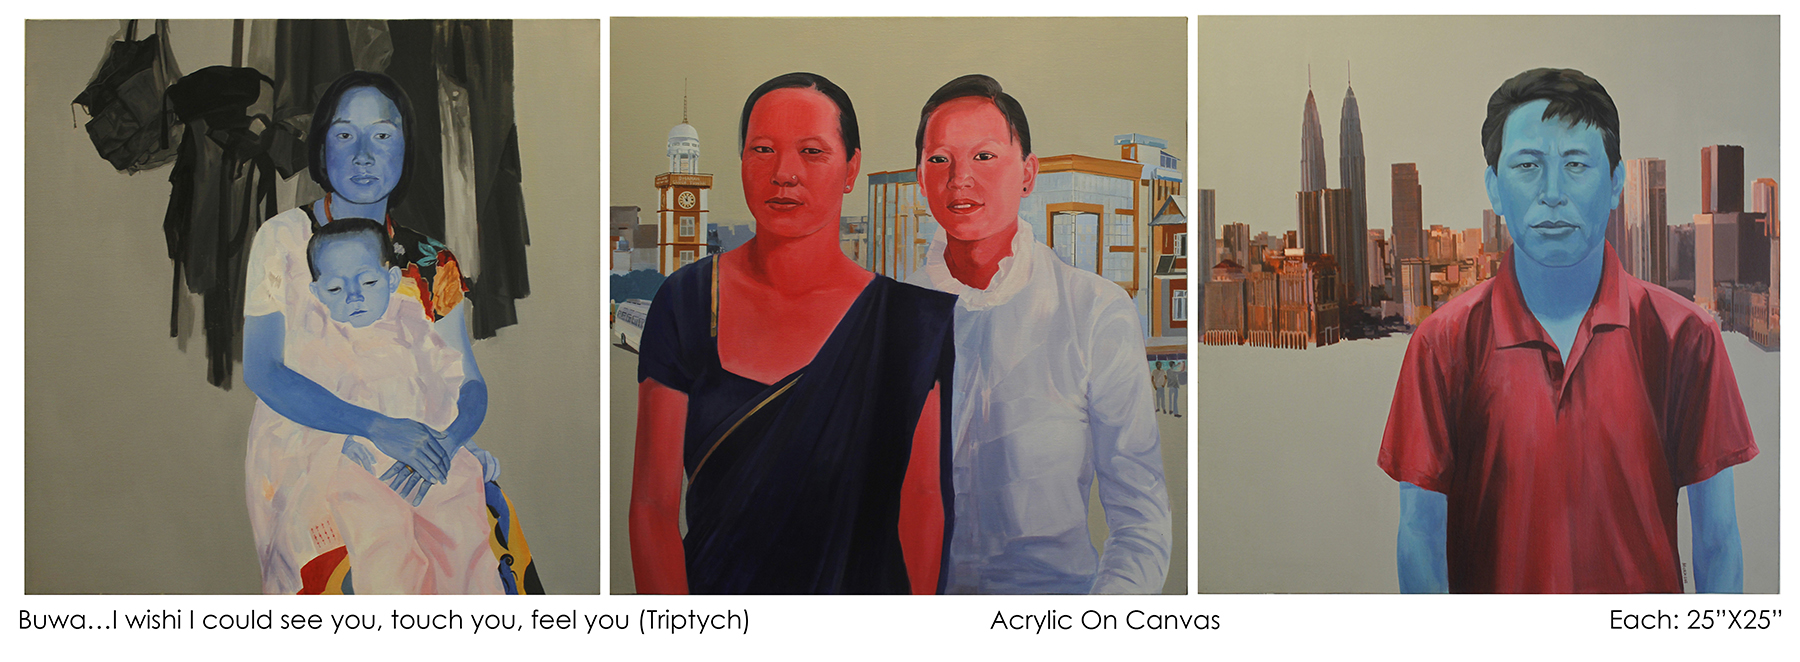 Buwa... I wish I could see you, touch you, and feel you (Triptych) 2015